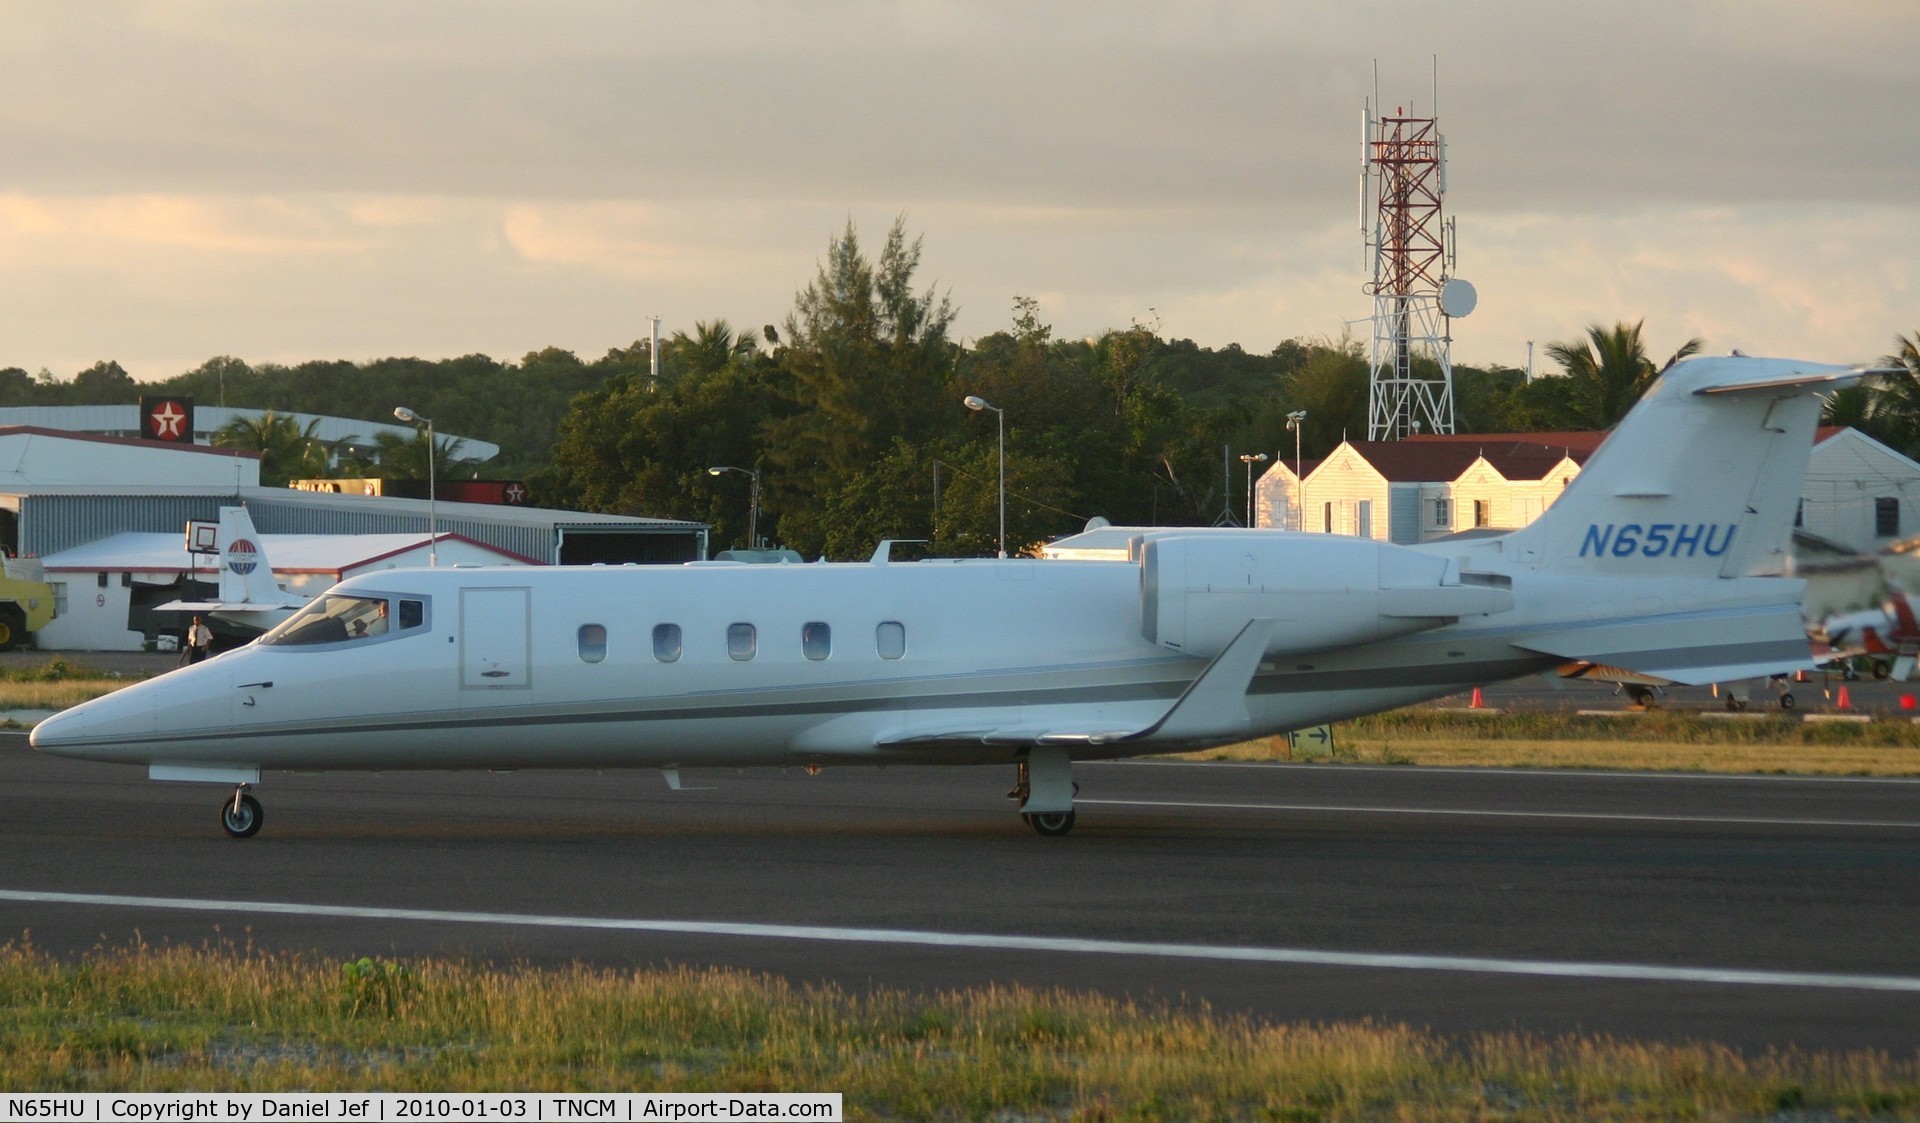 N65HU, 2001 Learjet Inc 60 C/N 228, N65HU just landed at TNCM back tracking the active for parking